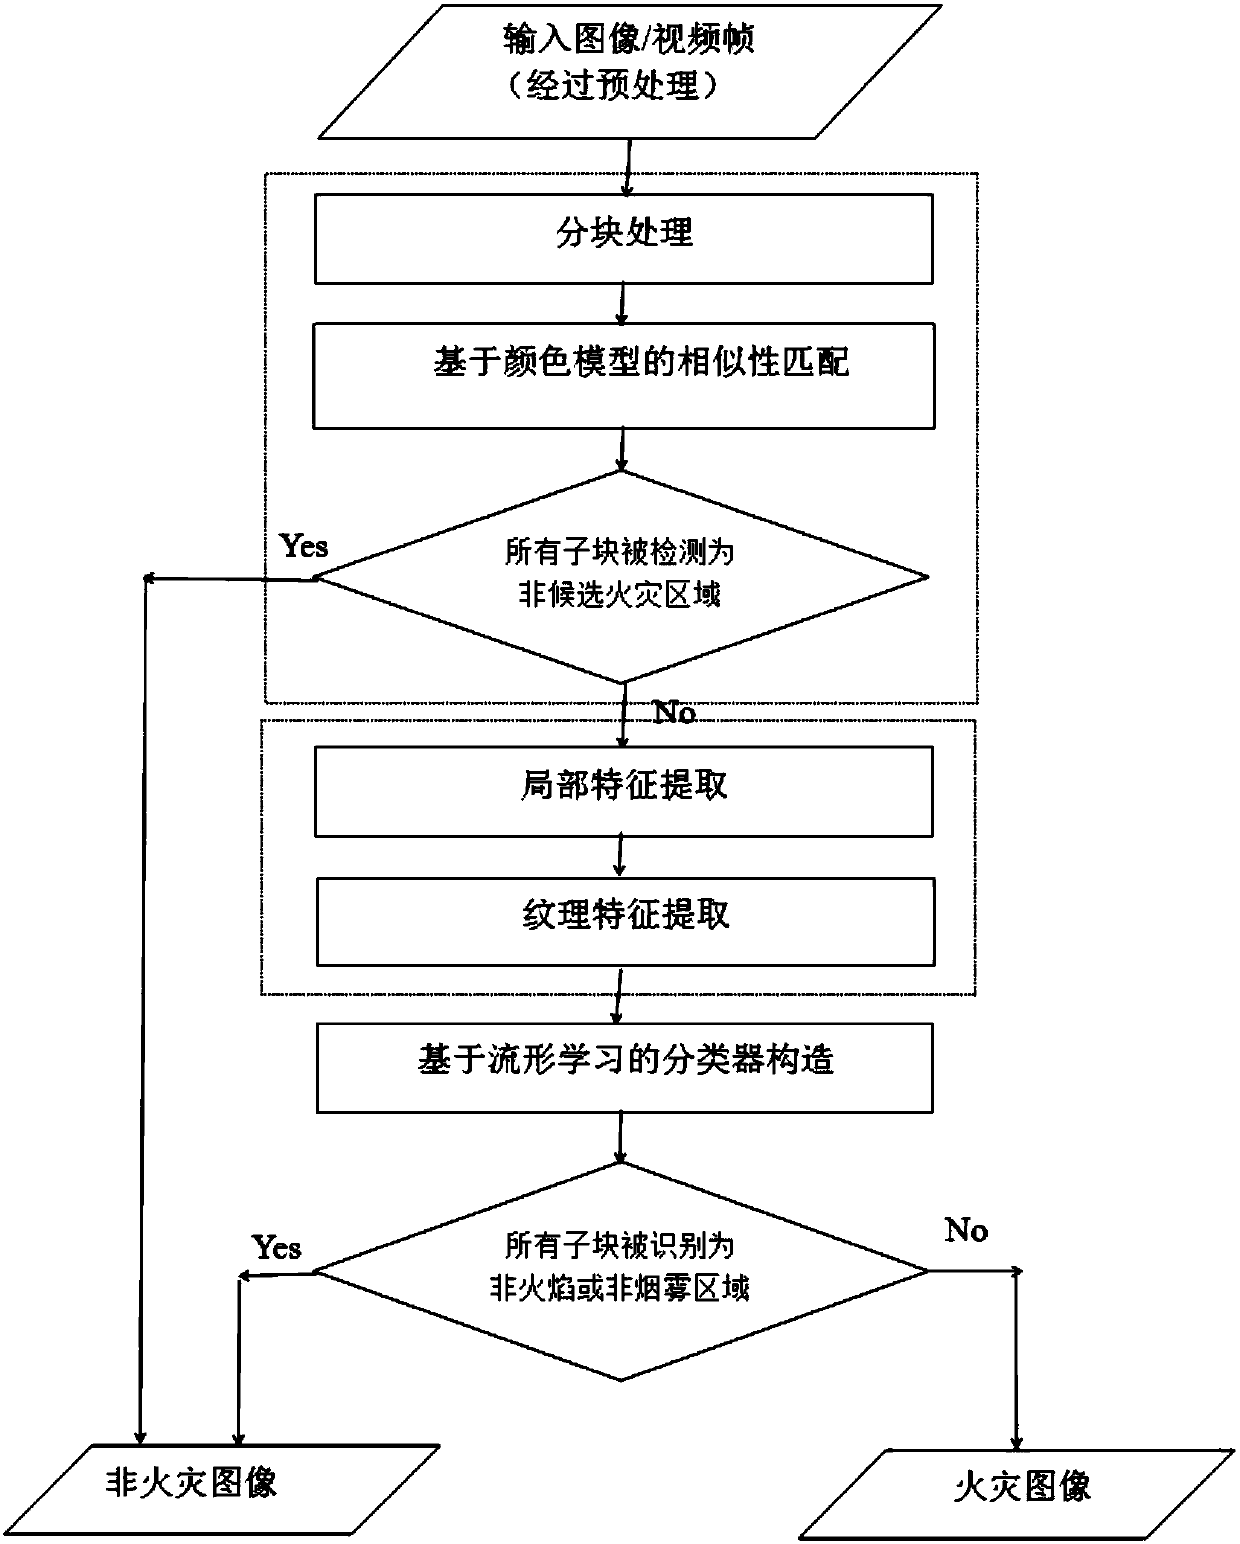 Fire image recognition method based on mixed feature and manifold learning